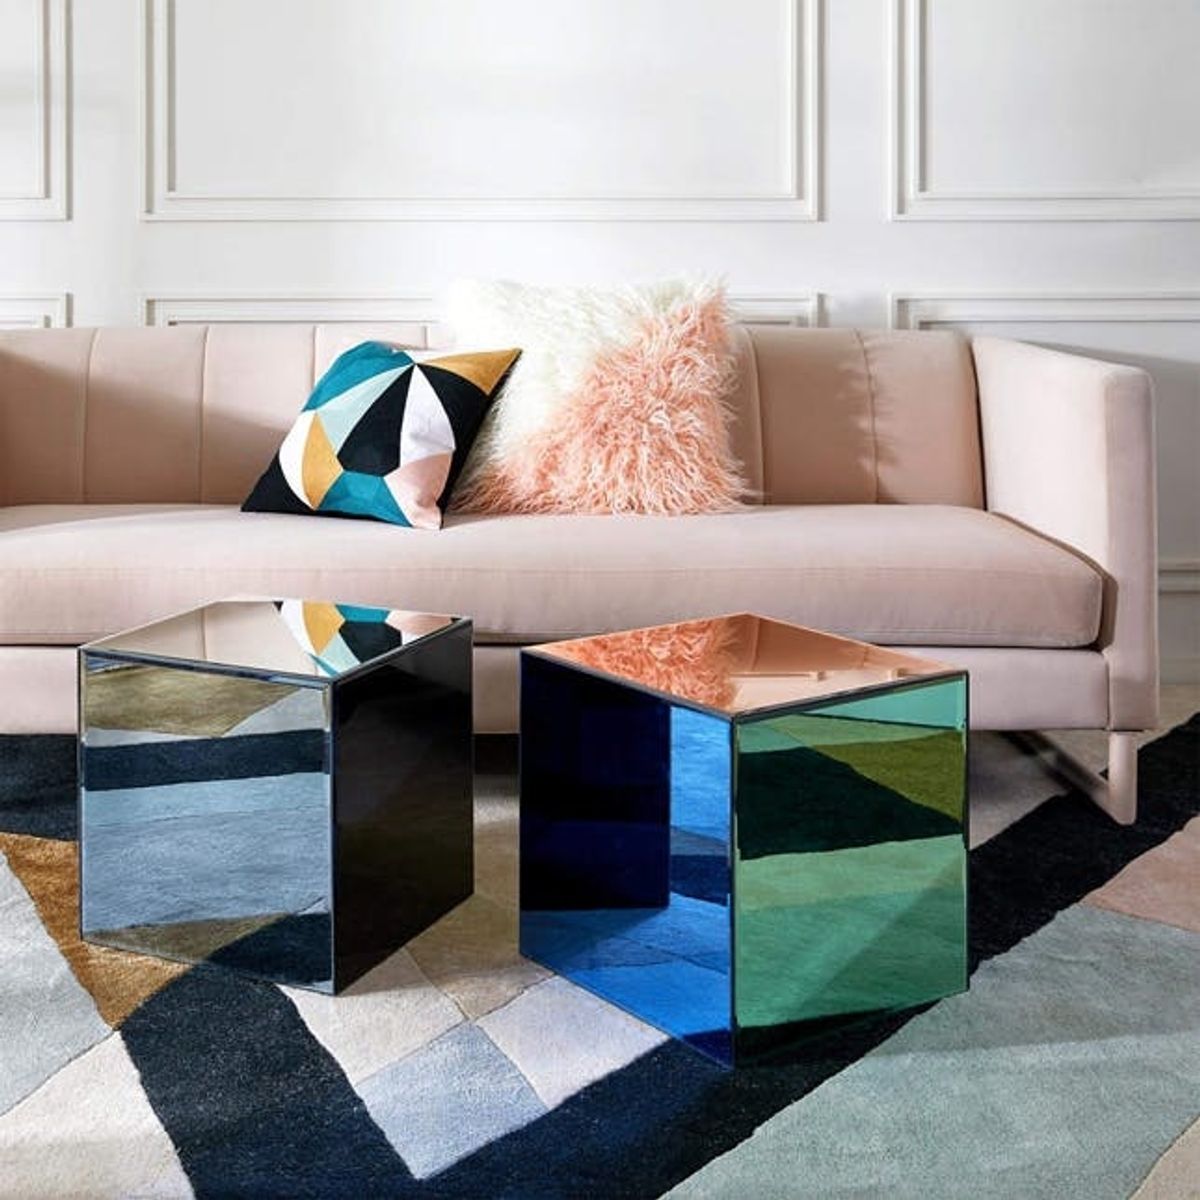 Jonathan Adler Just Released a Collection With Amazon and We’re Obsessed